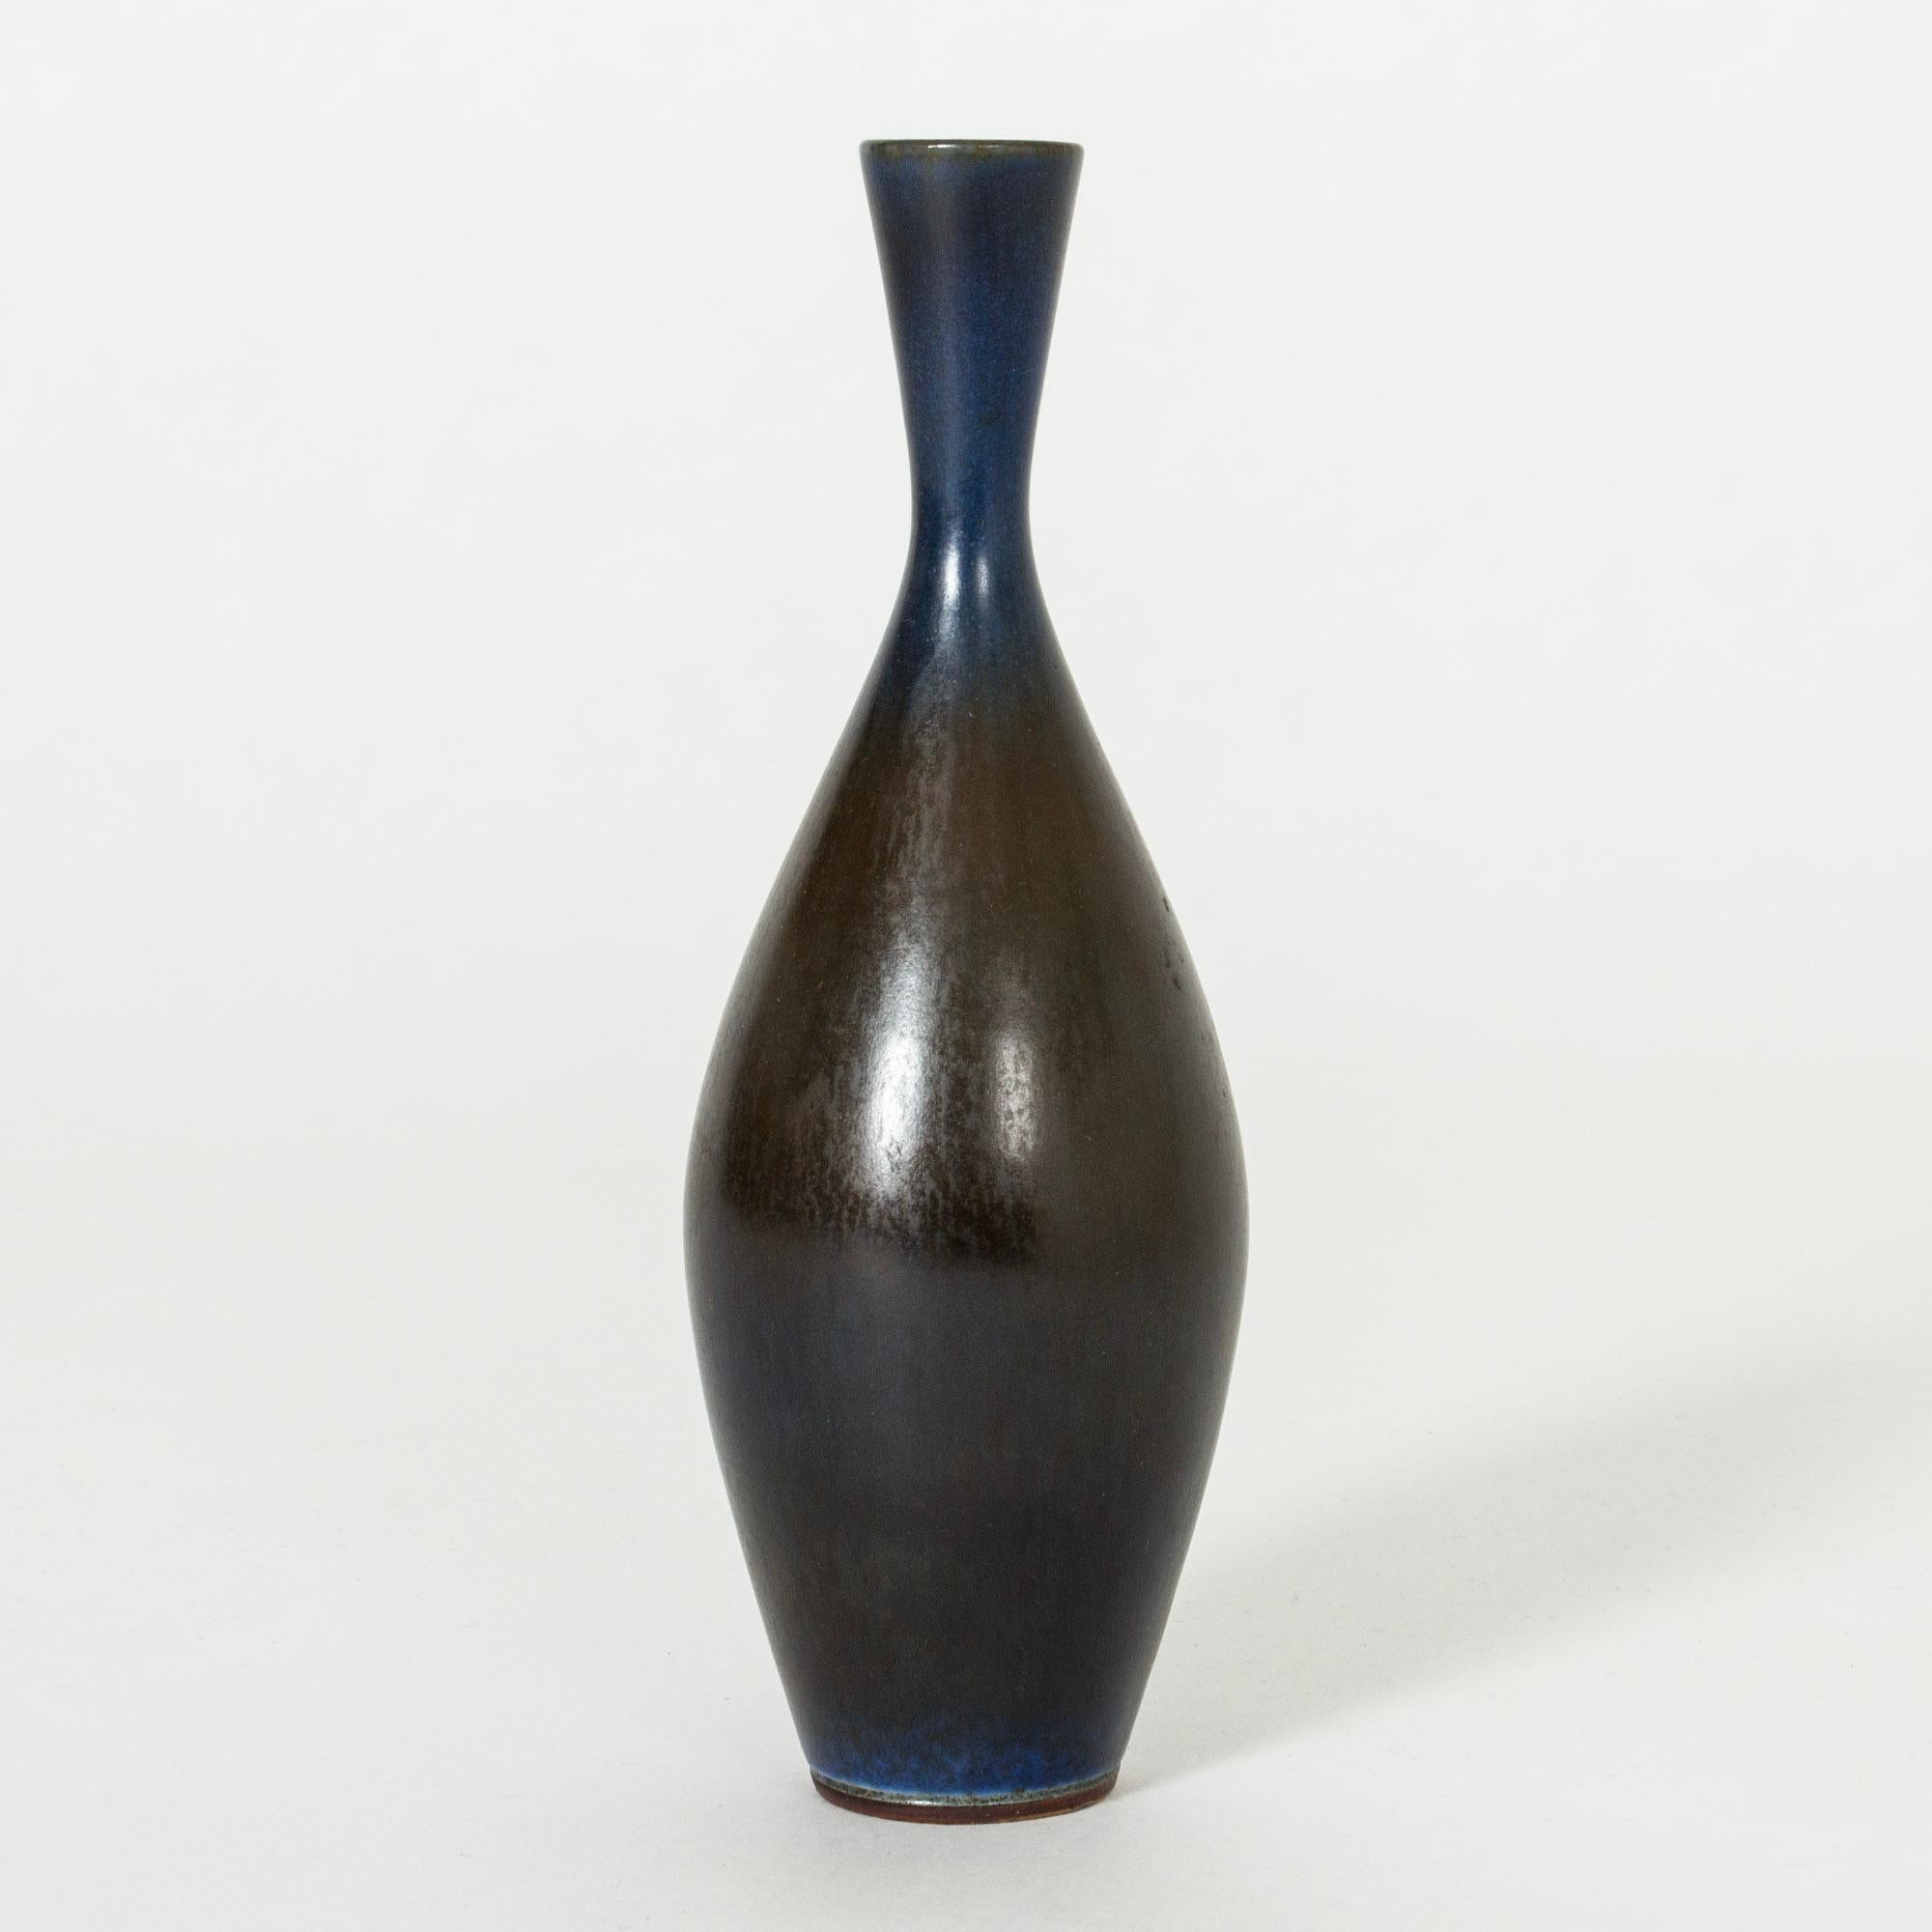 Elegant, small stoneware vase by Berndt Friberg, in a smooth form with dark blue hare’s fur glaze, lighter around the neck. Somewhat glossy finish.

Berndt Friberg was a Swedish ceramicist, renowned for his stoneware vases and vessels for